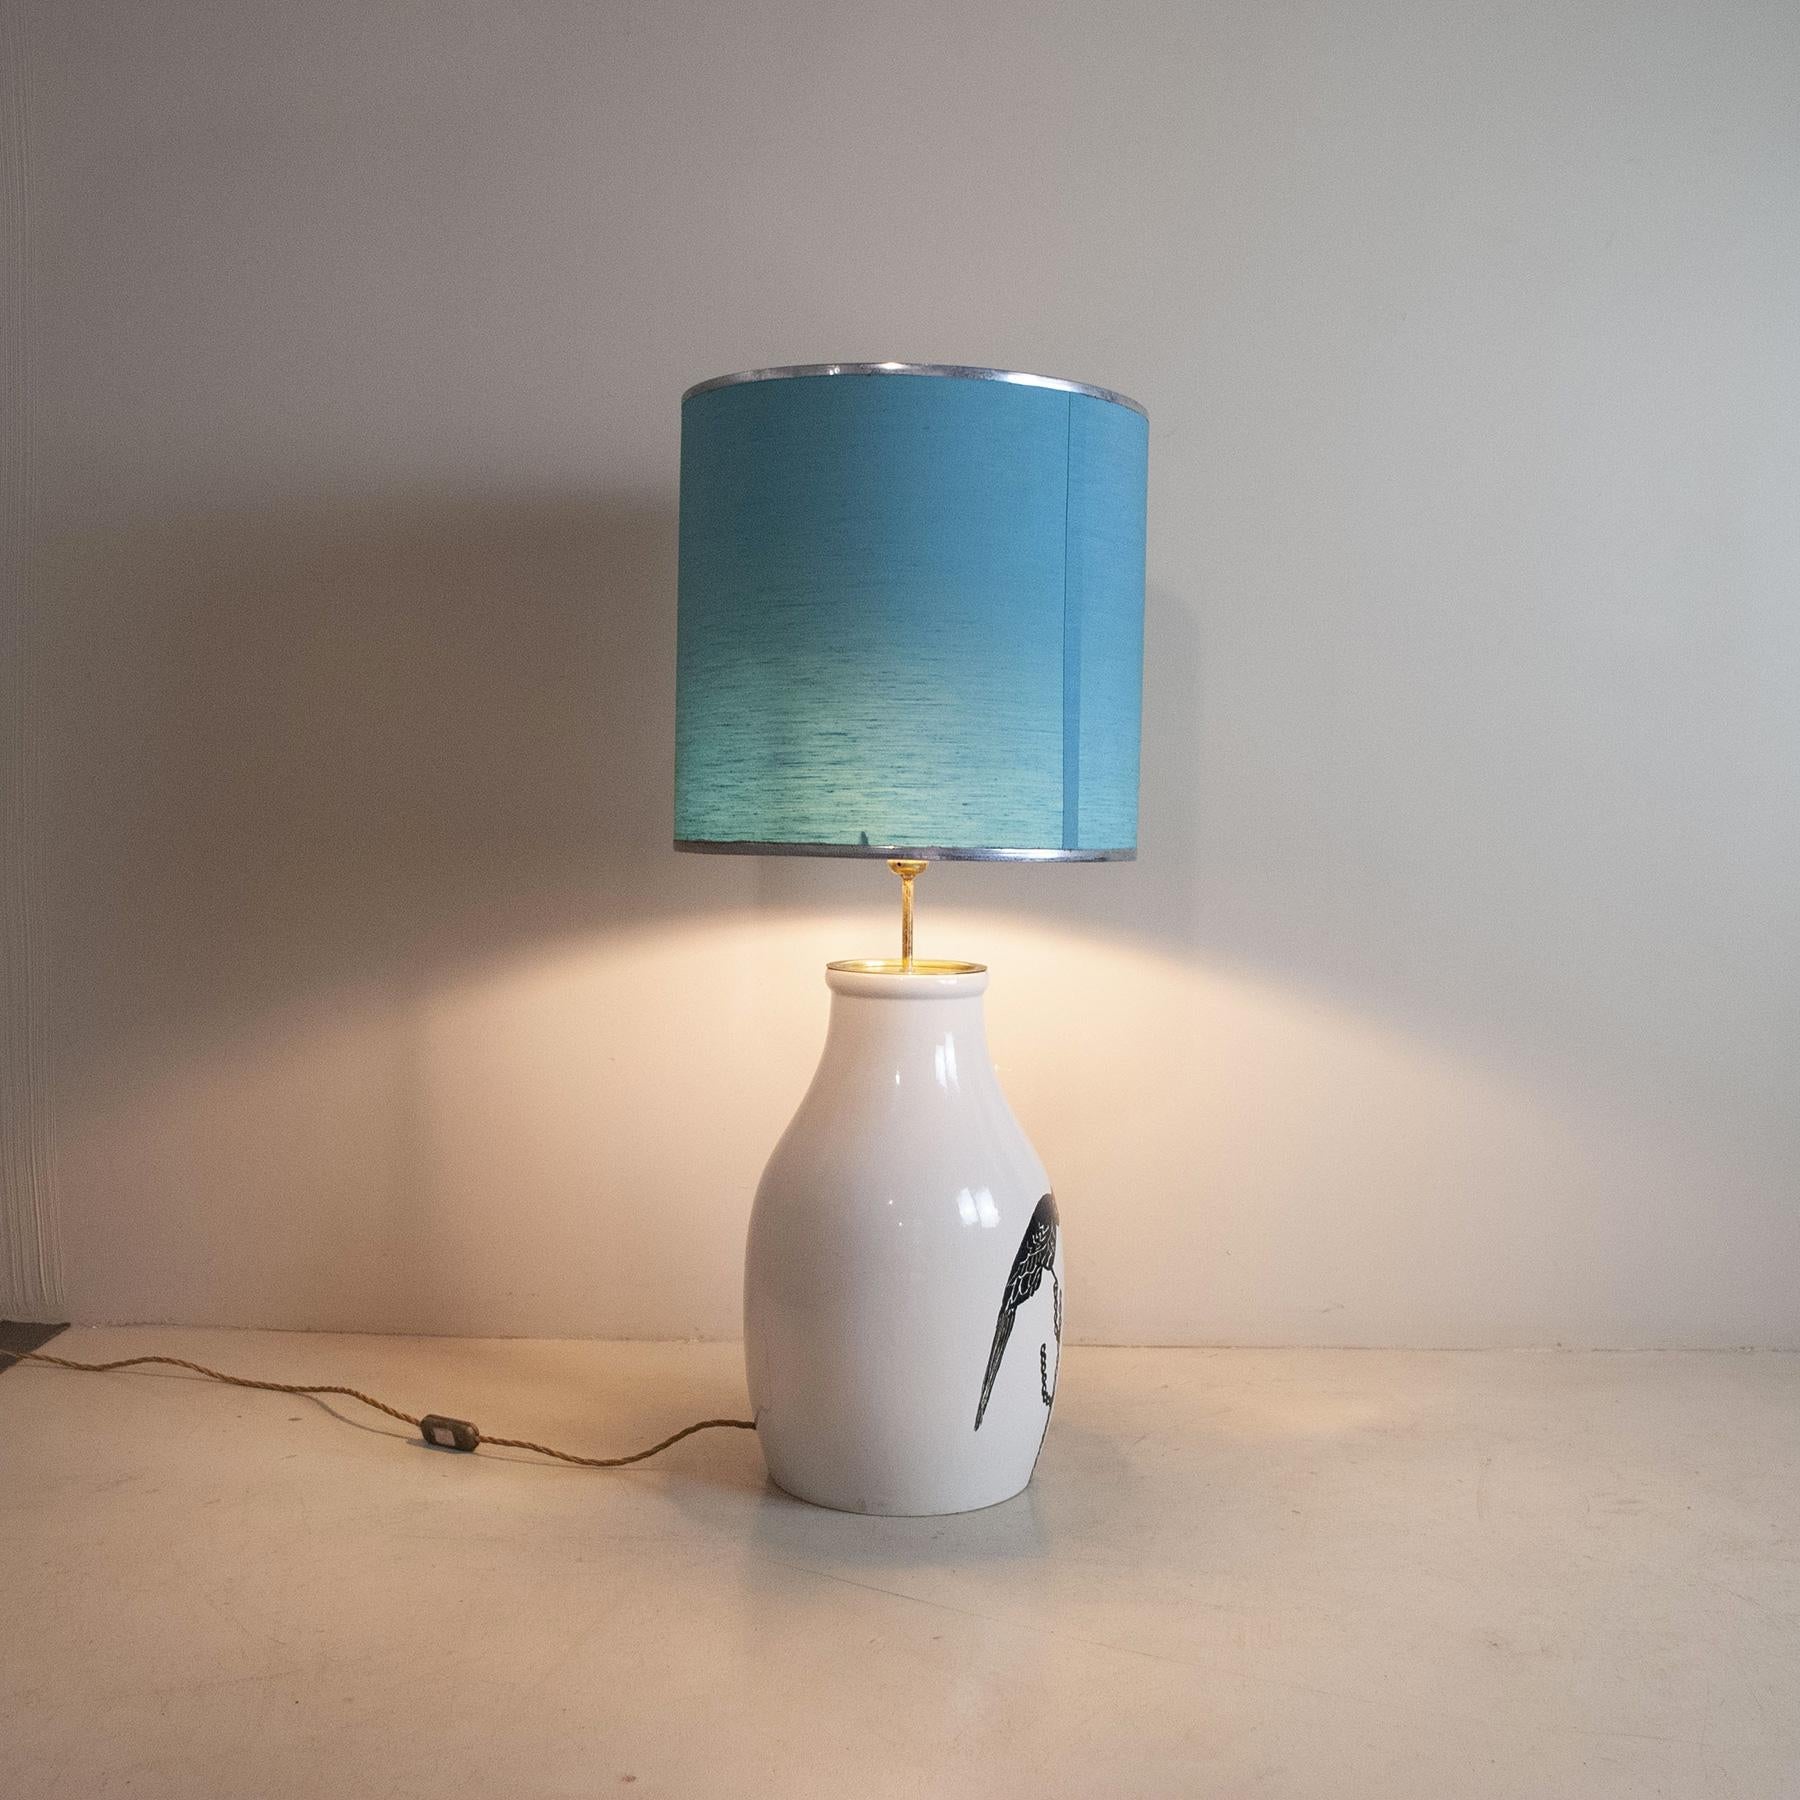 Glazed Italian Midcentury Ceramic Table Lamp with Parrots Painting from the Sixties For Sale